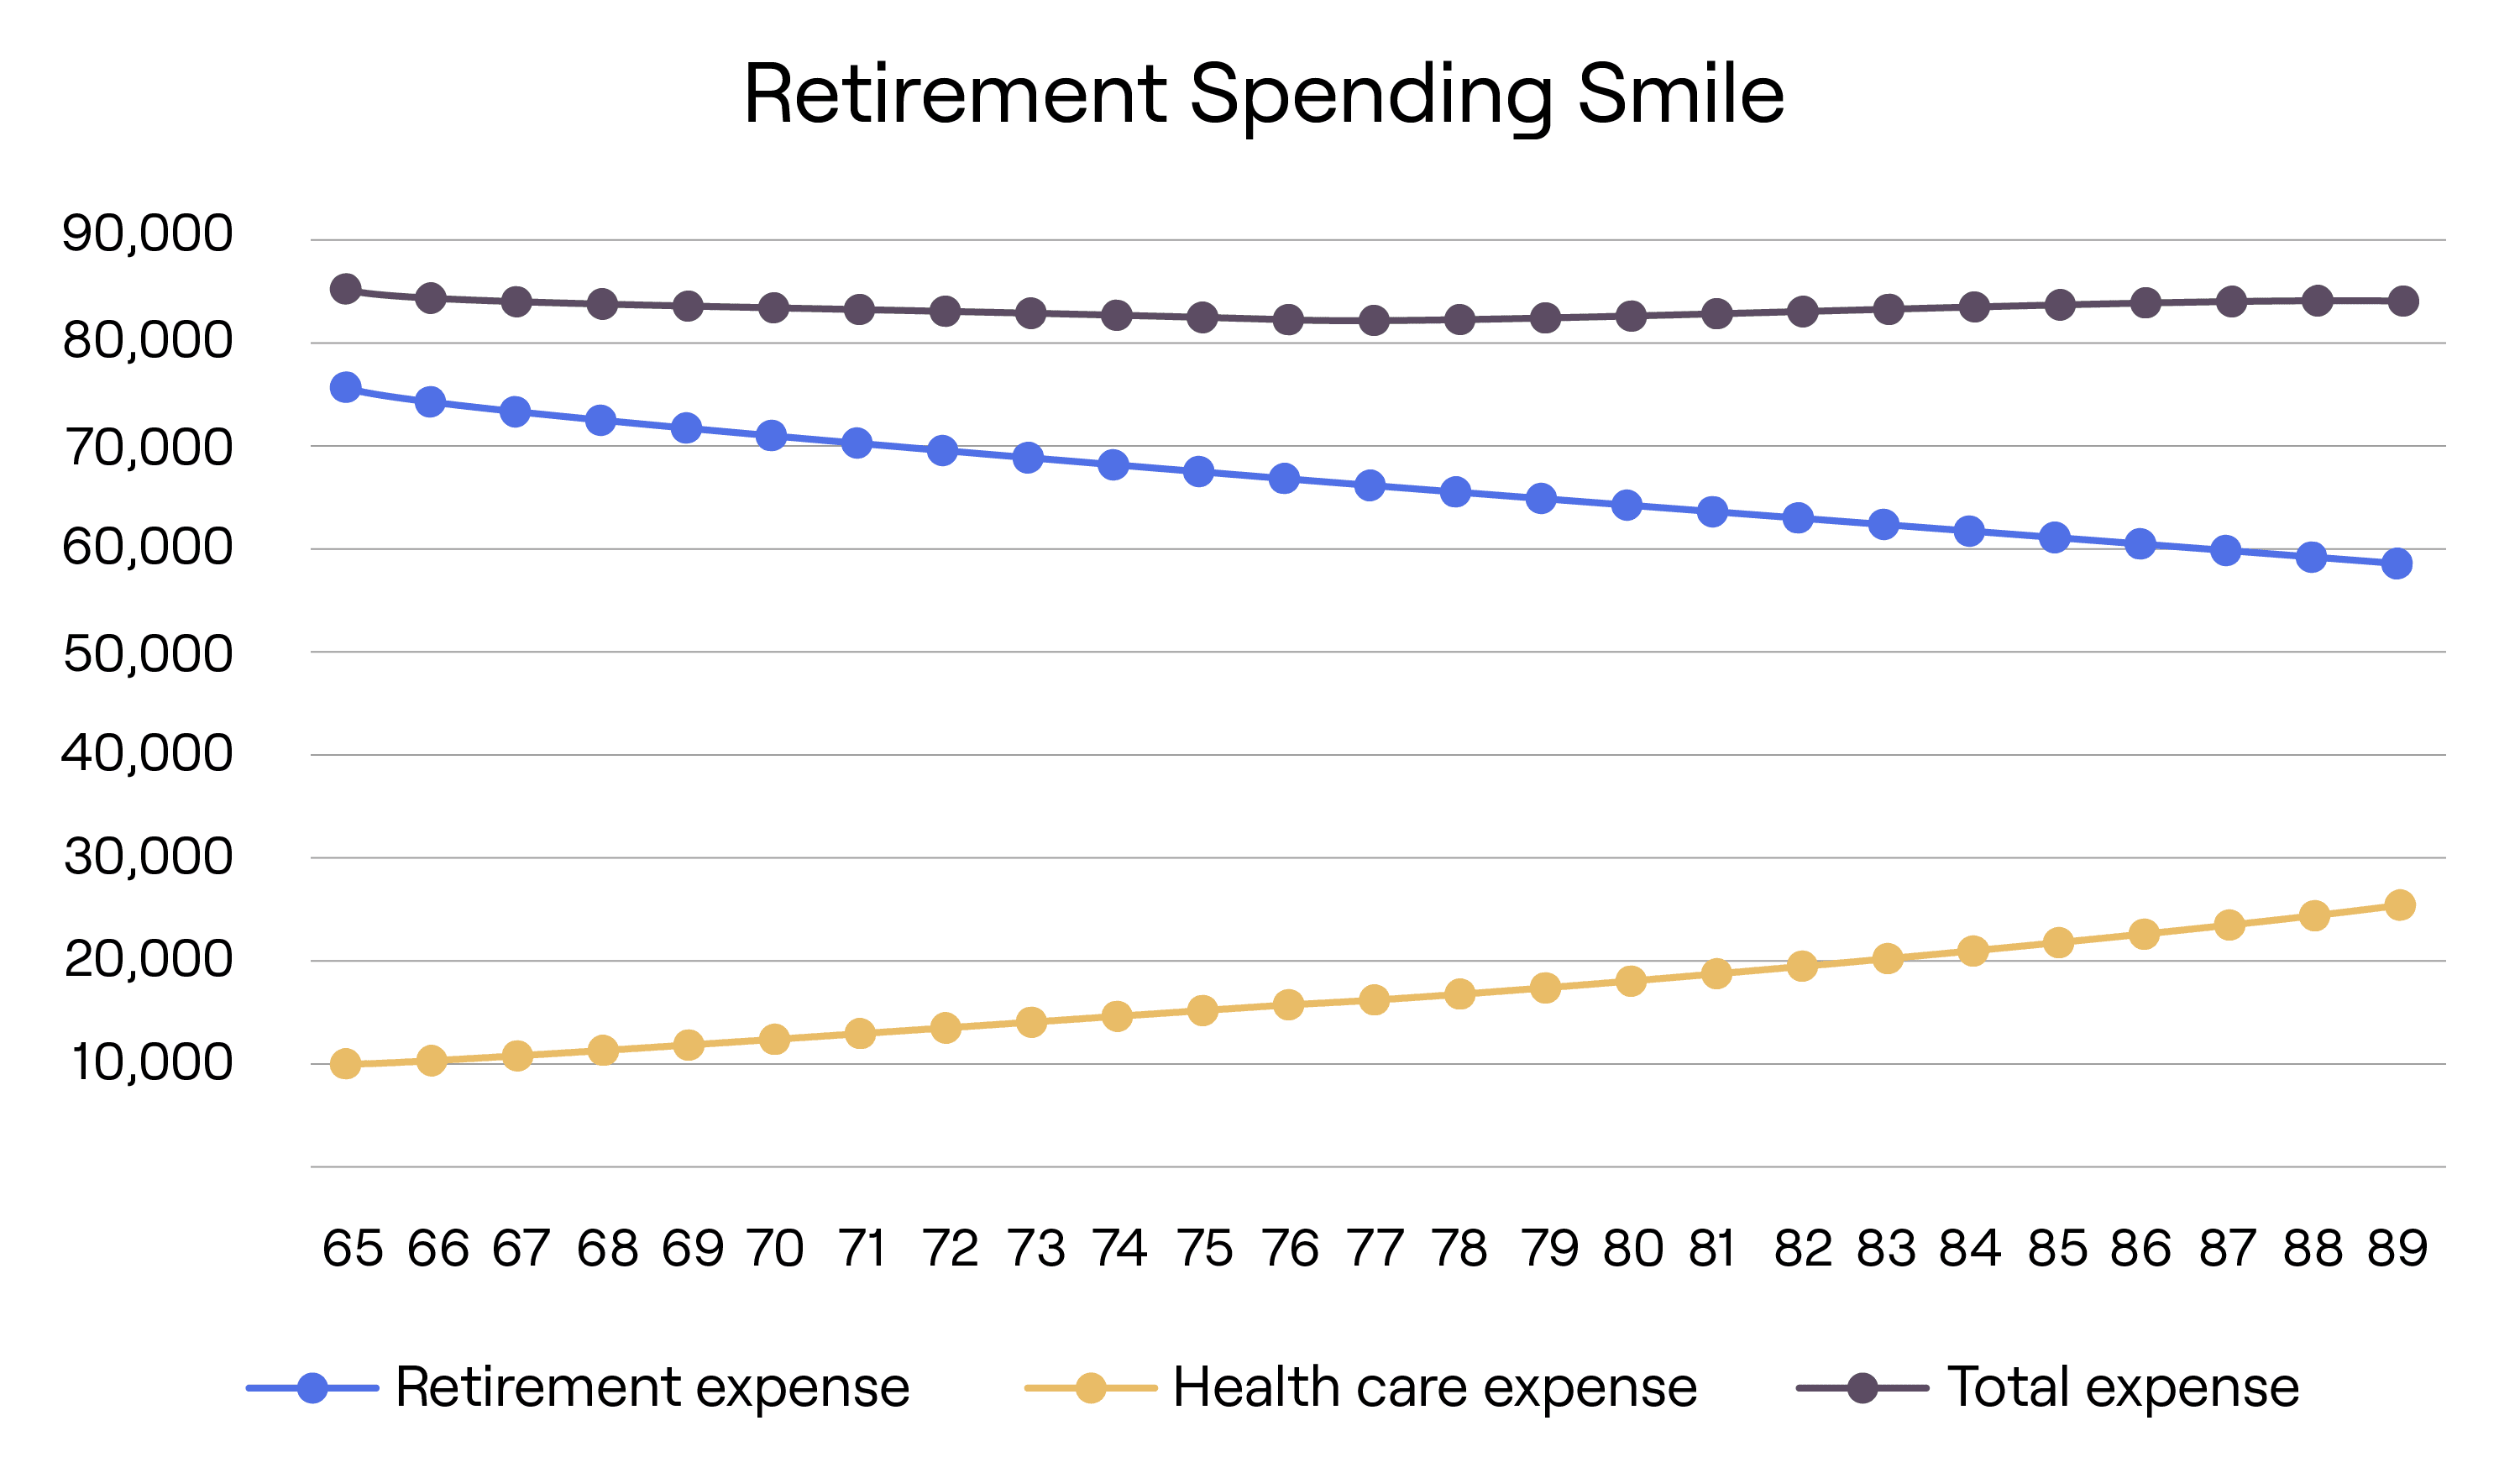 Graph indicating smile shape of total expenses as retirement expense goes down over time and health care expense rises